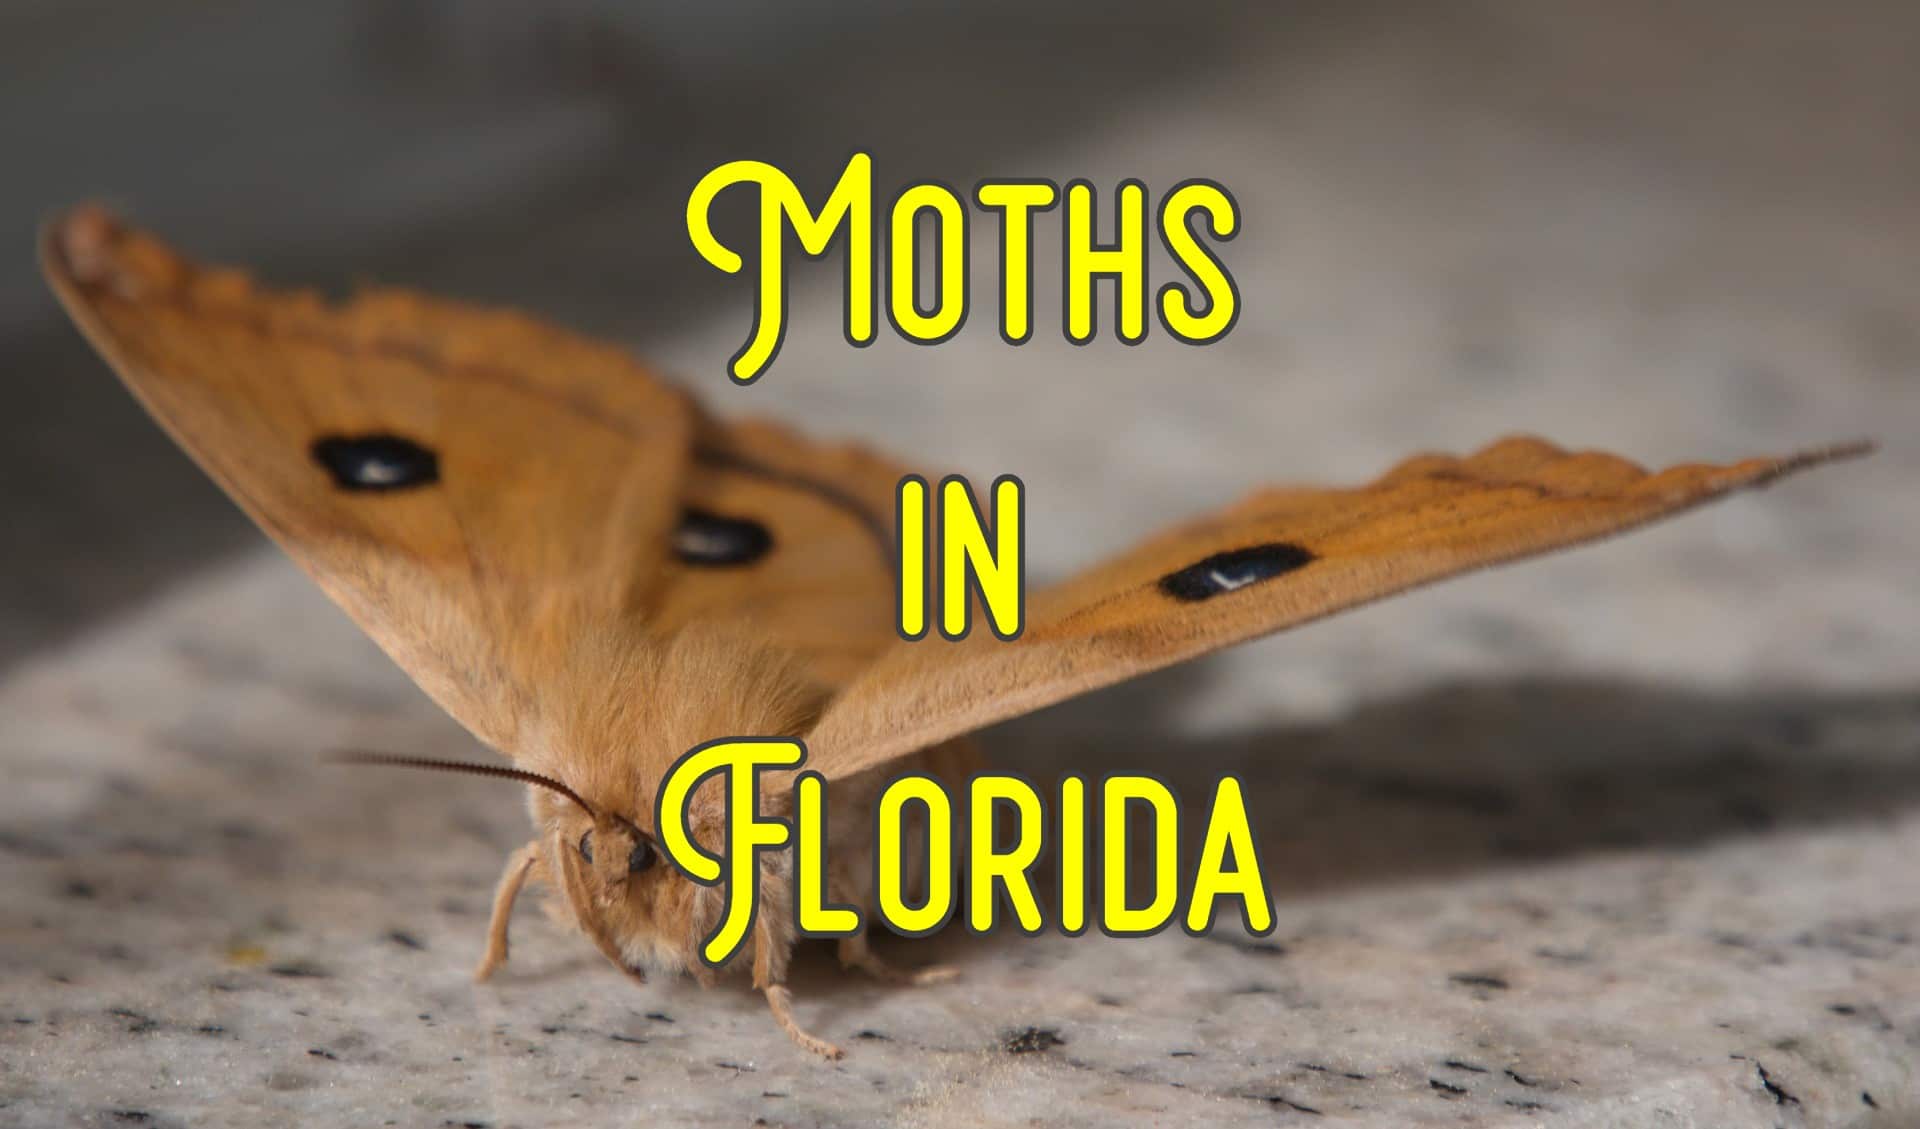 51 Common Moths in Florida (Pictures and Identification)